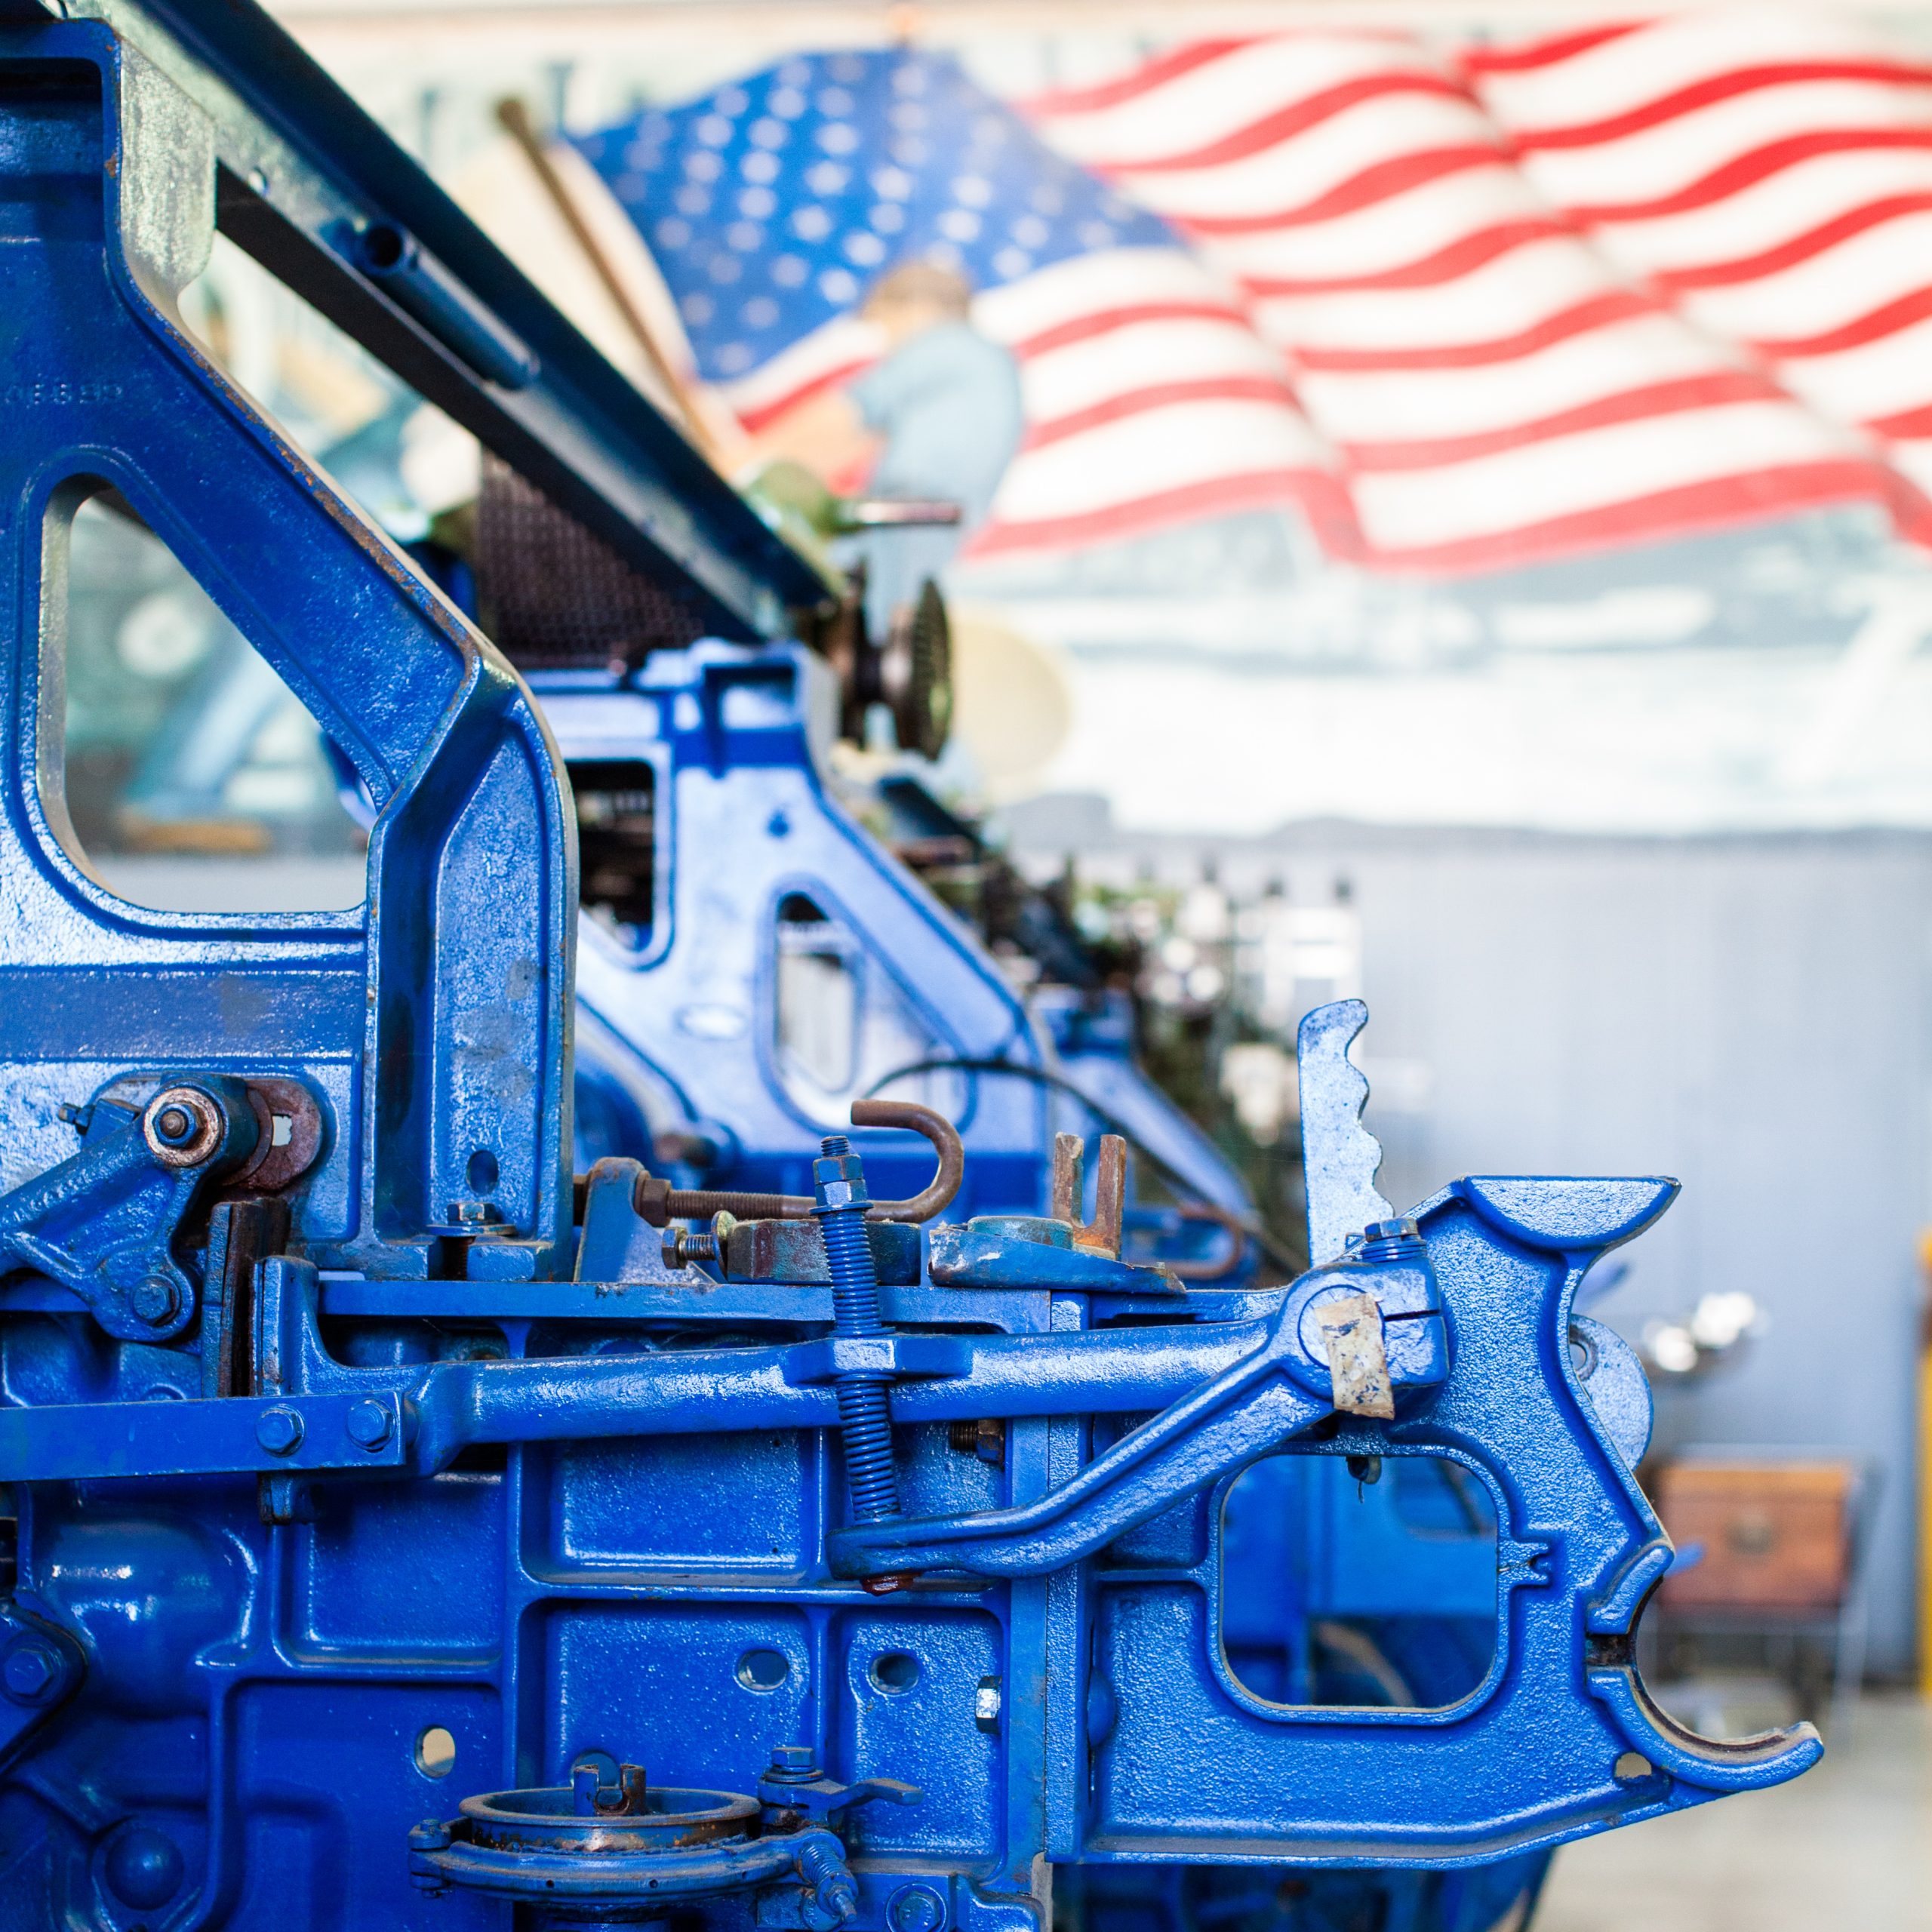 color photograph with blue toyoda industrial loom in foreground with American flag mural in background